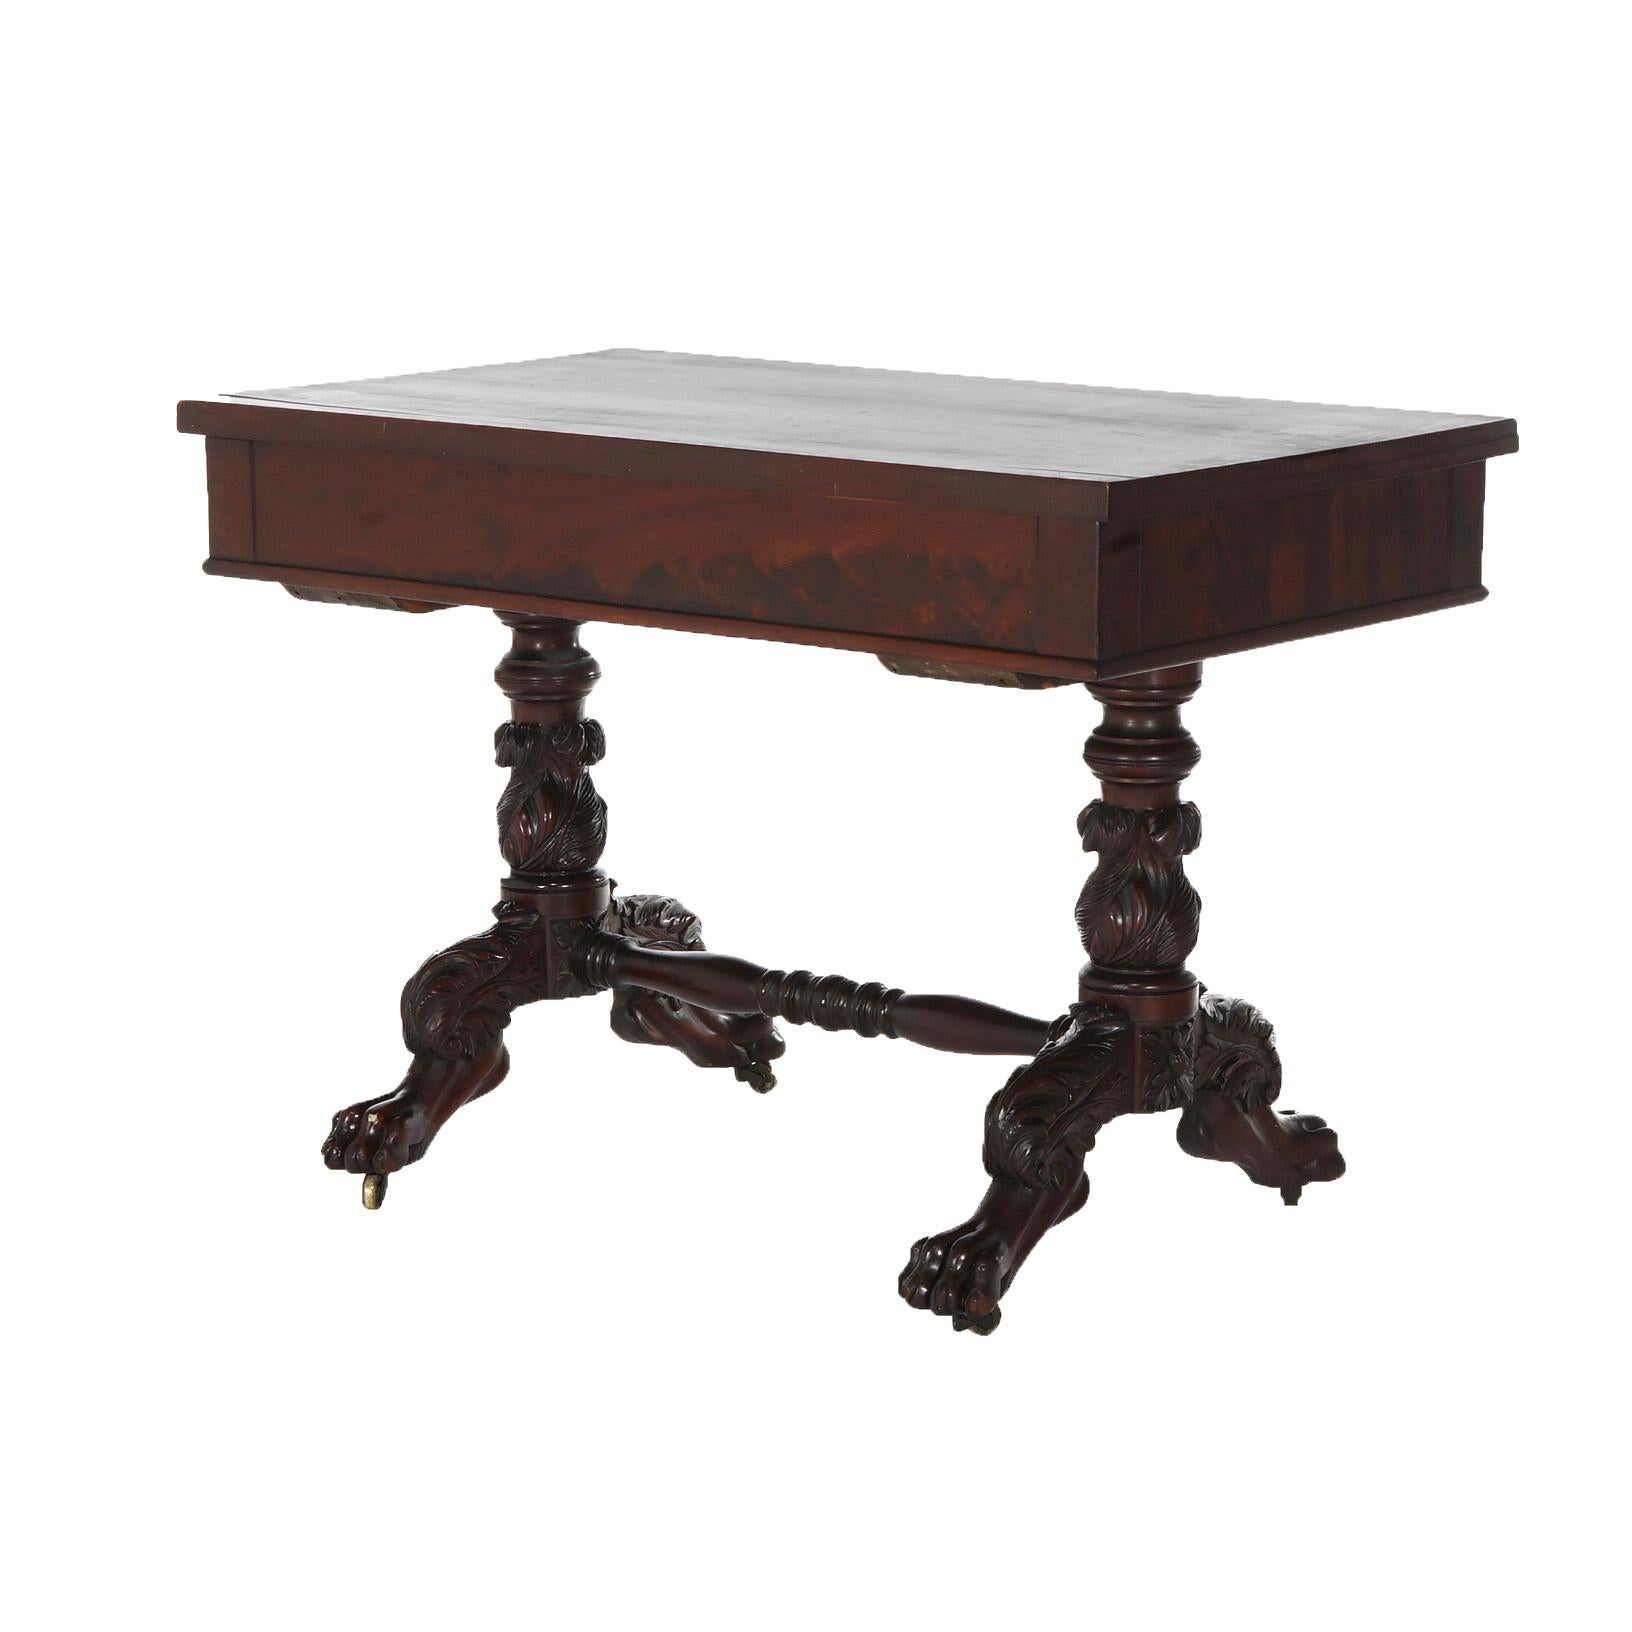 ***Ask About Reduced In-House Delivery Rates - Reliable Professional Service & Fully Insured***

An antique American Empire sofa table offers flame mahogany construction with rectangular top having deep skirt and raised on balustrade legs with